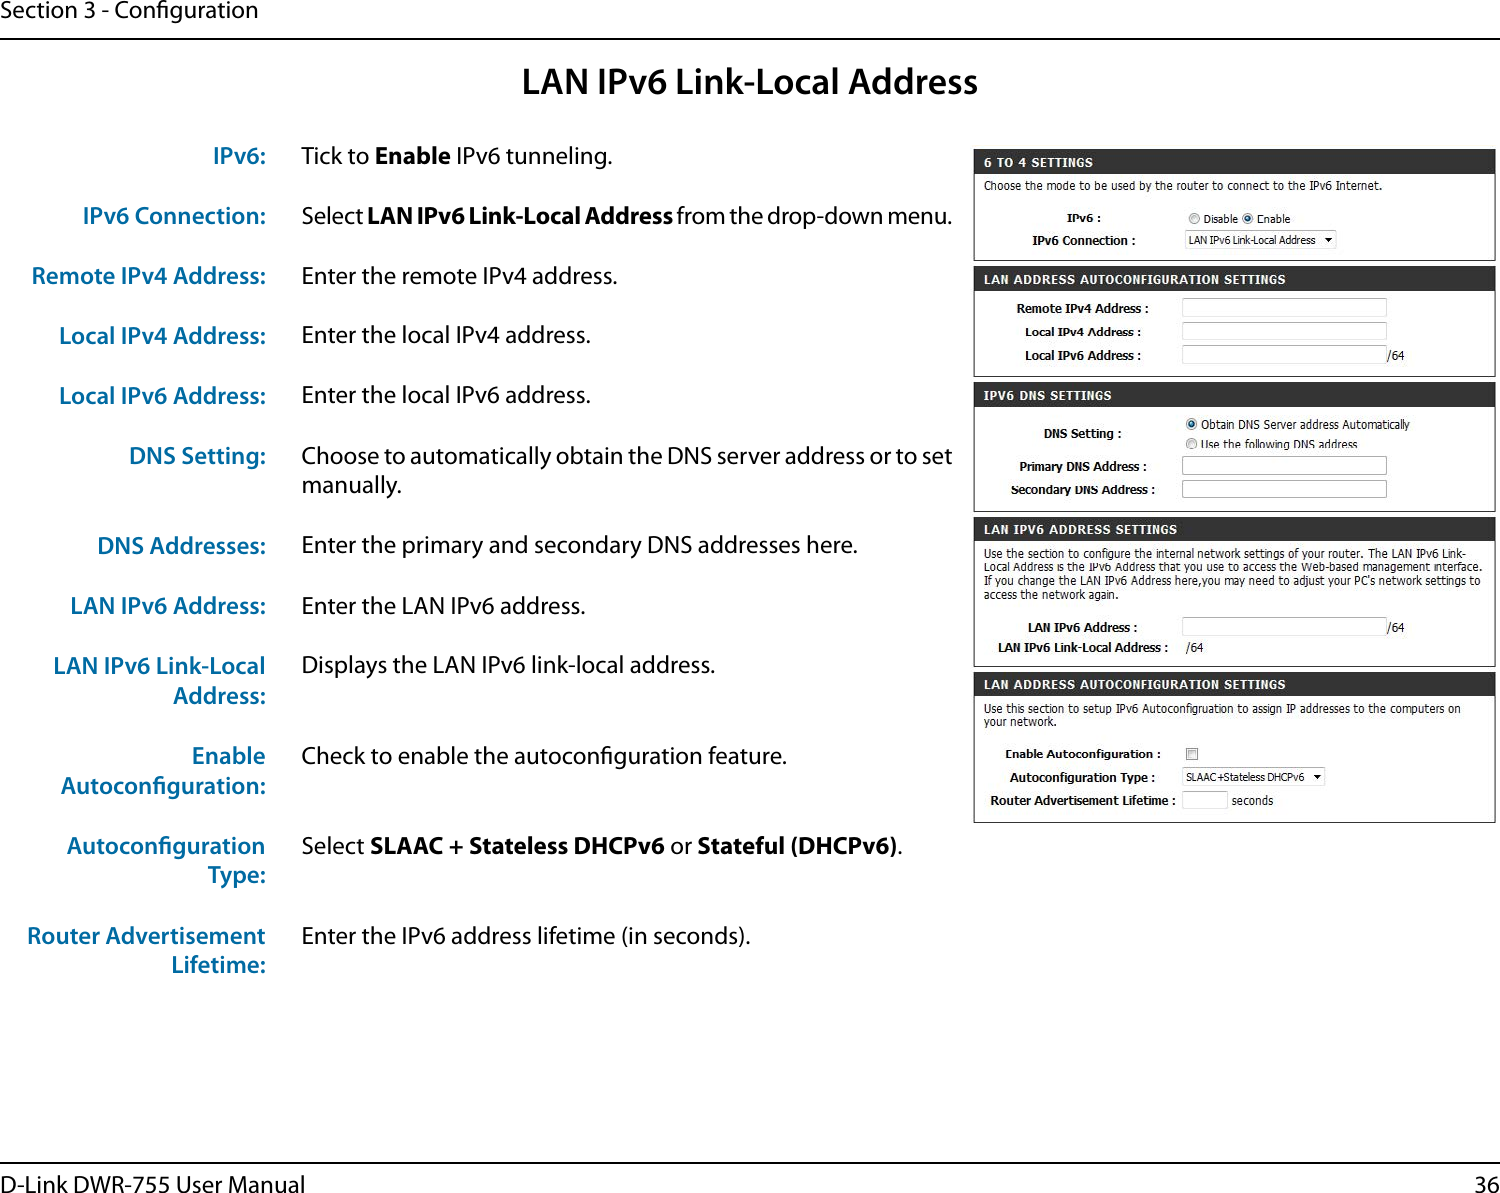 36D-Link DWR-755 User ManualSection 3 - CongurationLAN IPv6 Link-Local AddressTick to Enable IPv6 tunneling.Select LAN IPv6 Link-Local Address from the drop-down menu.Enter the remote IPv4 address.Enter the local IPv4 address.Enter the local IPv6 address.Choose to automatically obtain the DNS server address or to set manually.Enter the primary and secondary DNS addresses here.Enter the LAN IPv6 address.Displays the LAN IPv6 link-local address.Check to enable the autoconguration feature.Select SLAAC + Stateless DHCPv6 or Stateful (DHCPv6).Enter the IPv6 address lifetime (in seconds).IPv6:IPv6 Connection:Remote IPv4 Address:Local IPv4 Address:Local IPv6 Address:DNS Setting:DNS Addresses:LAN IPv6 Address:LAN IPv6 Link-Local Address:Enable Autoconguration:Autoconguration Type:Router Advertisement Lifetime: